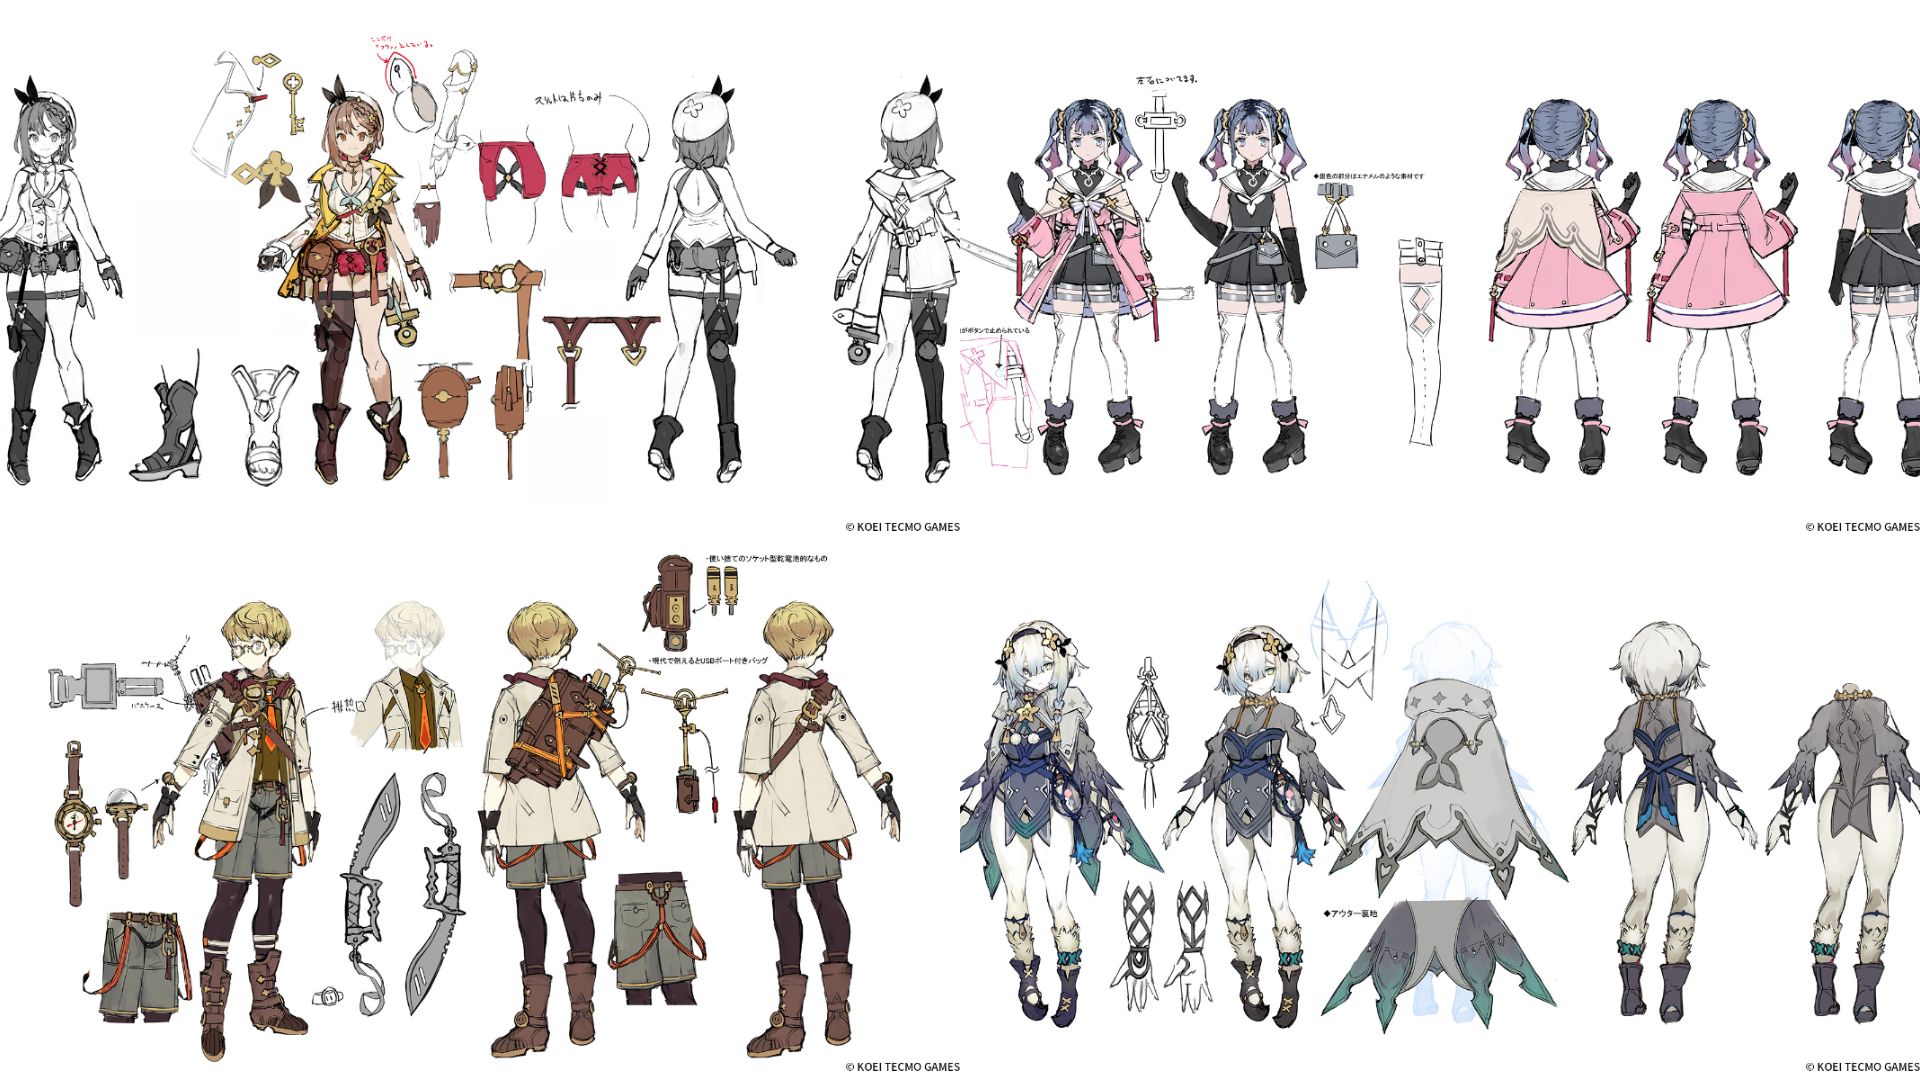 Atelier Ryza 2 Cosplay Fanart Referenc sheets feature